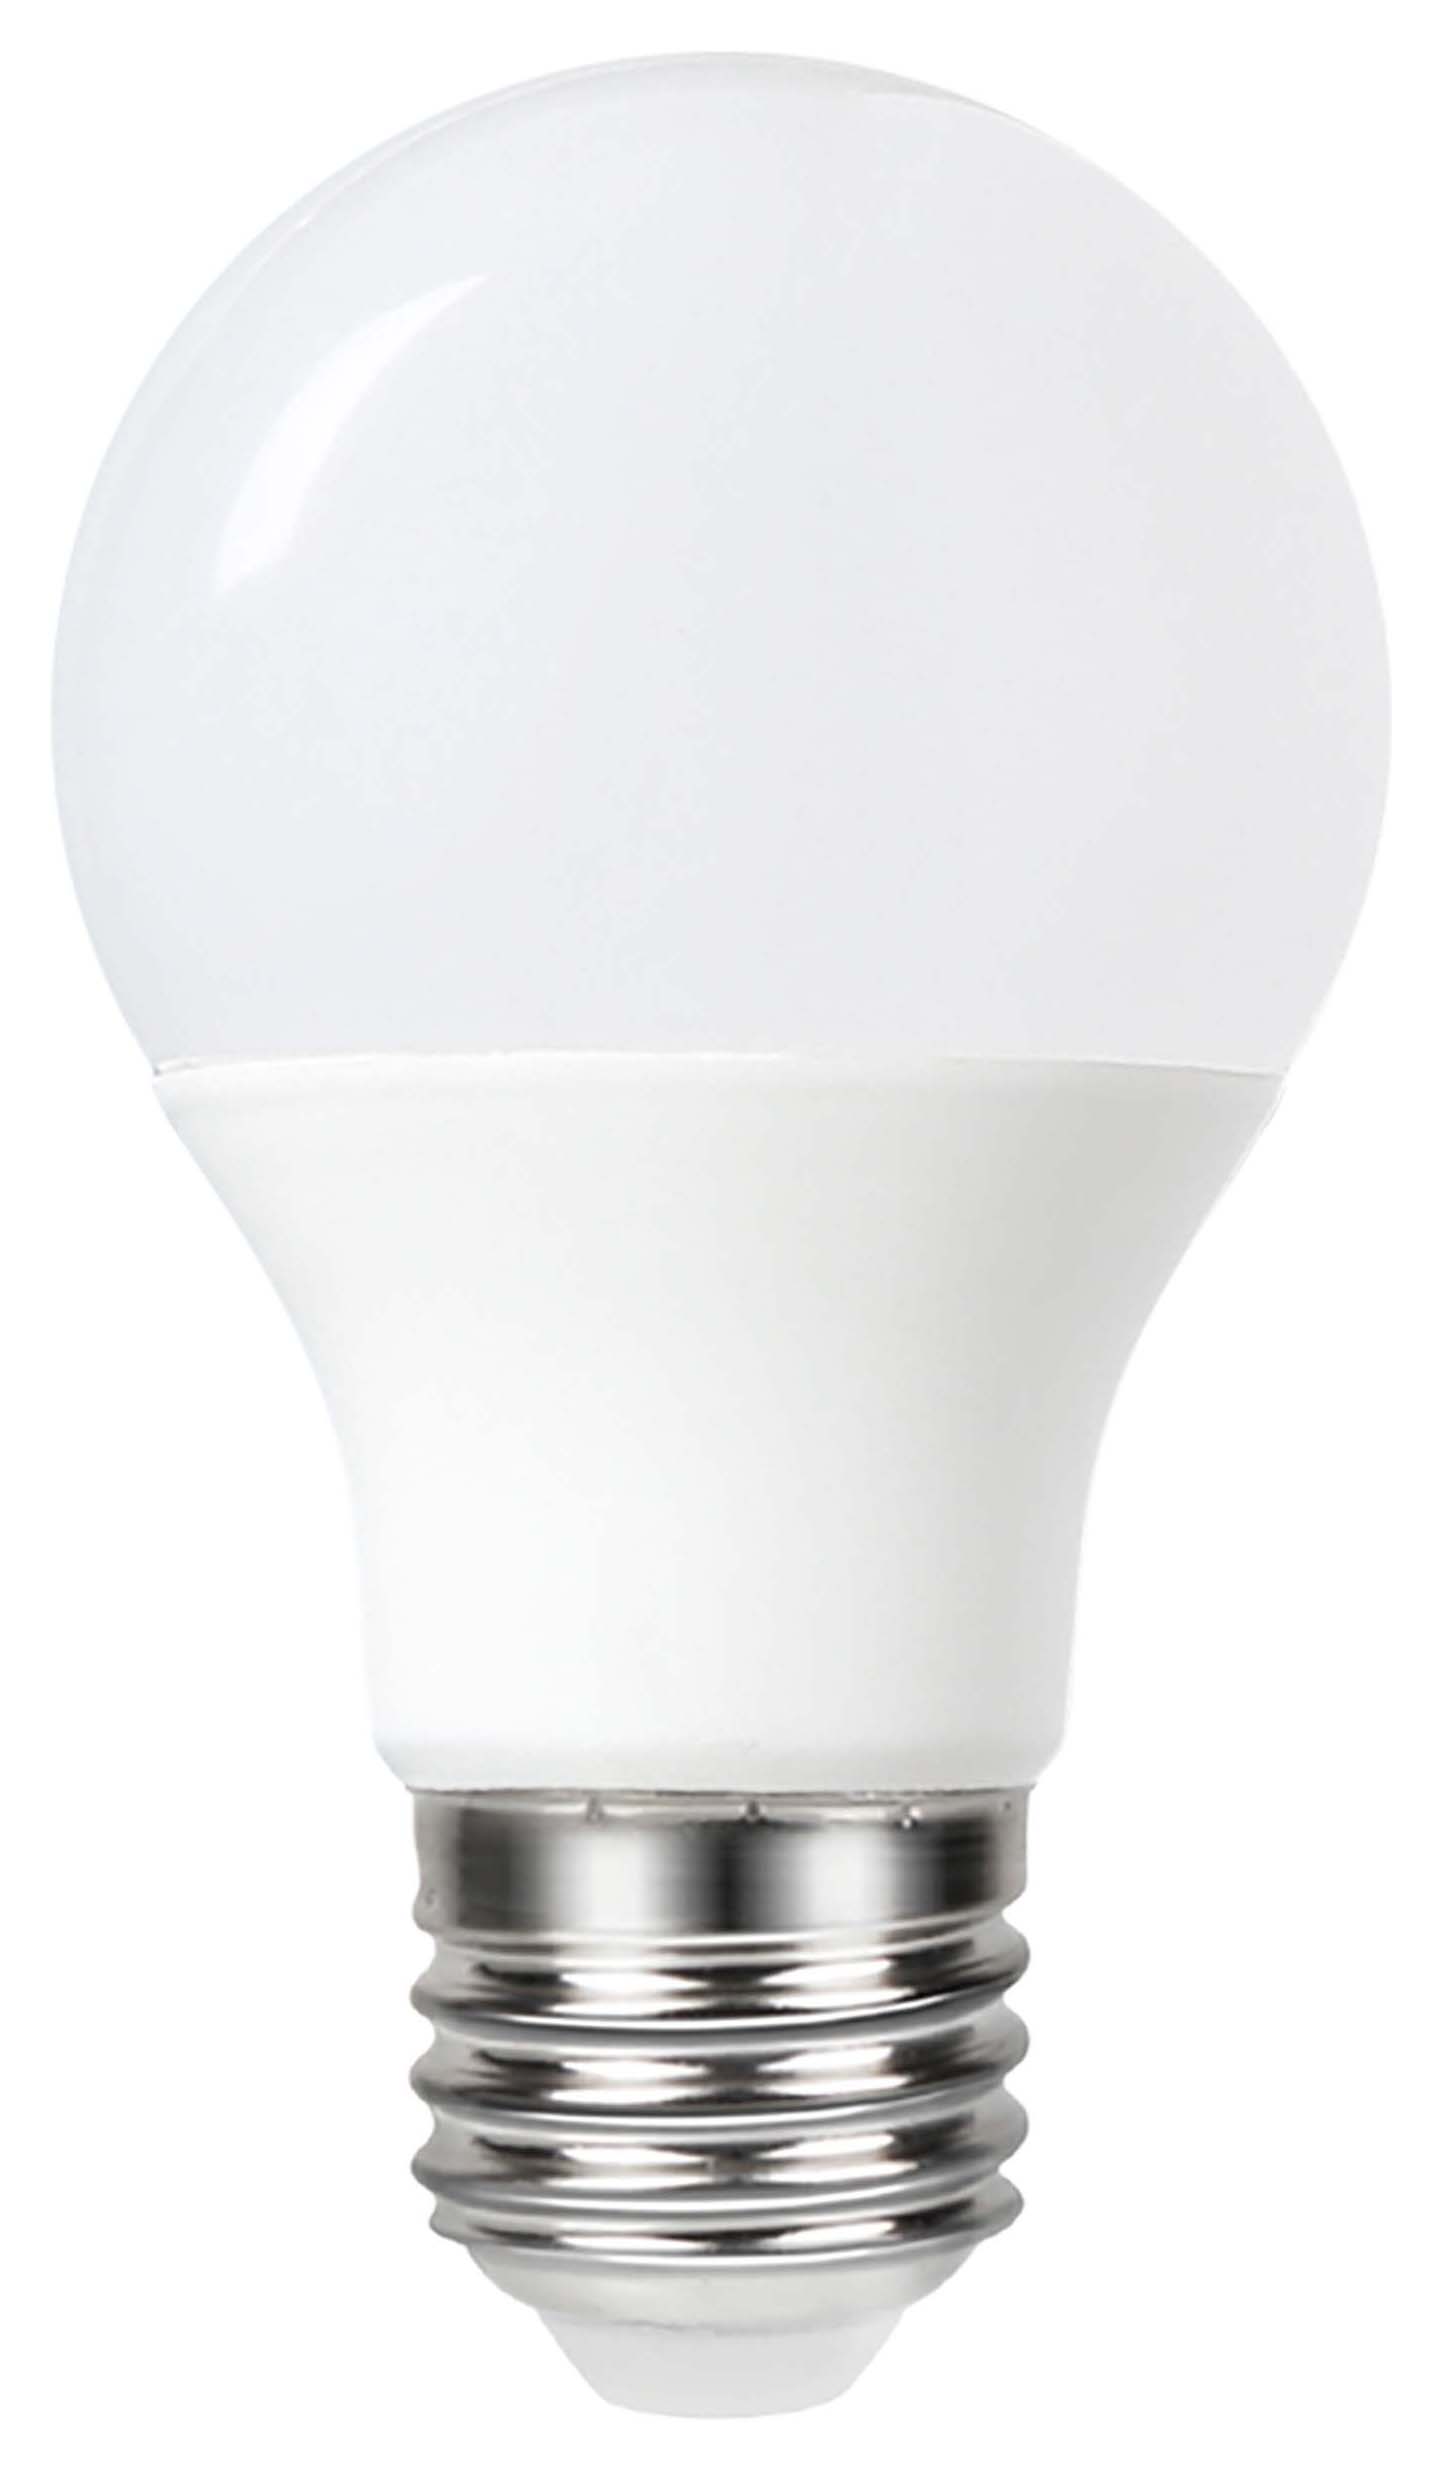 Image of Wickes Non-Dimmable GLS Opal LED E27 8.8W Cool White Light Bulb - Pack of 4